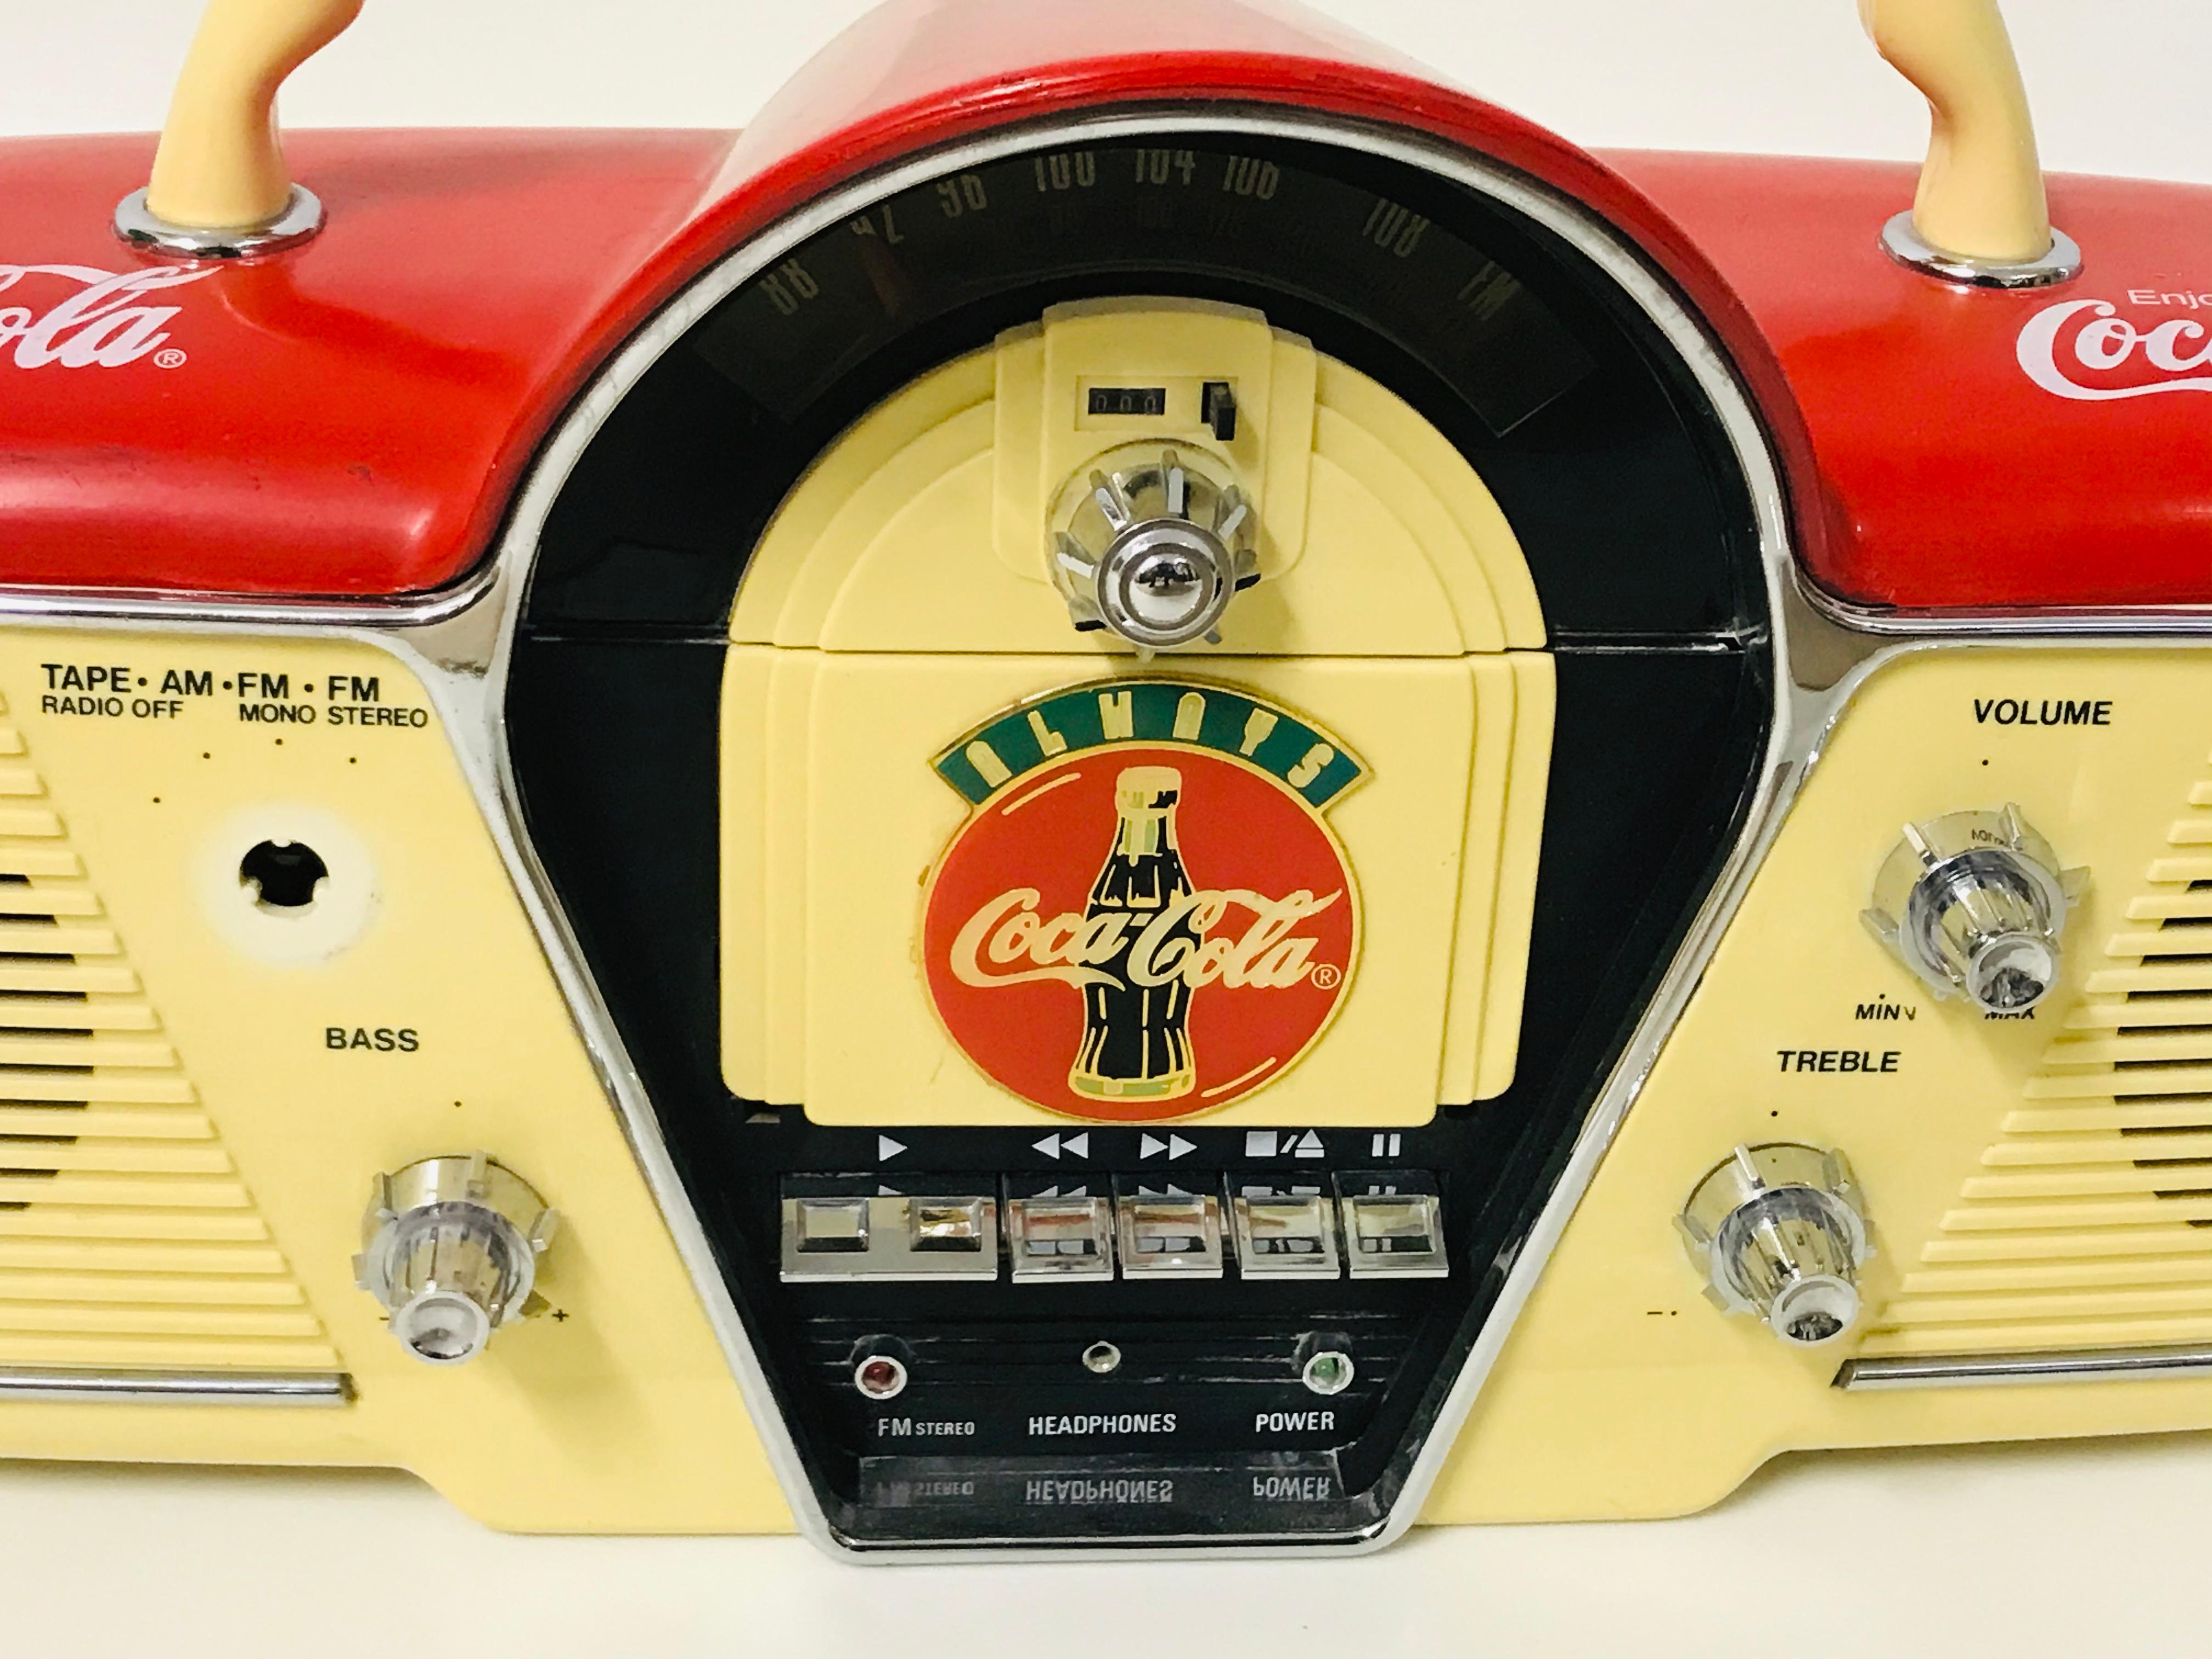 Radio was used like an advertising purpose by the company Coca - Cola. There is not preserved one button but it is fully functional and in original condition. TP - 02082.